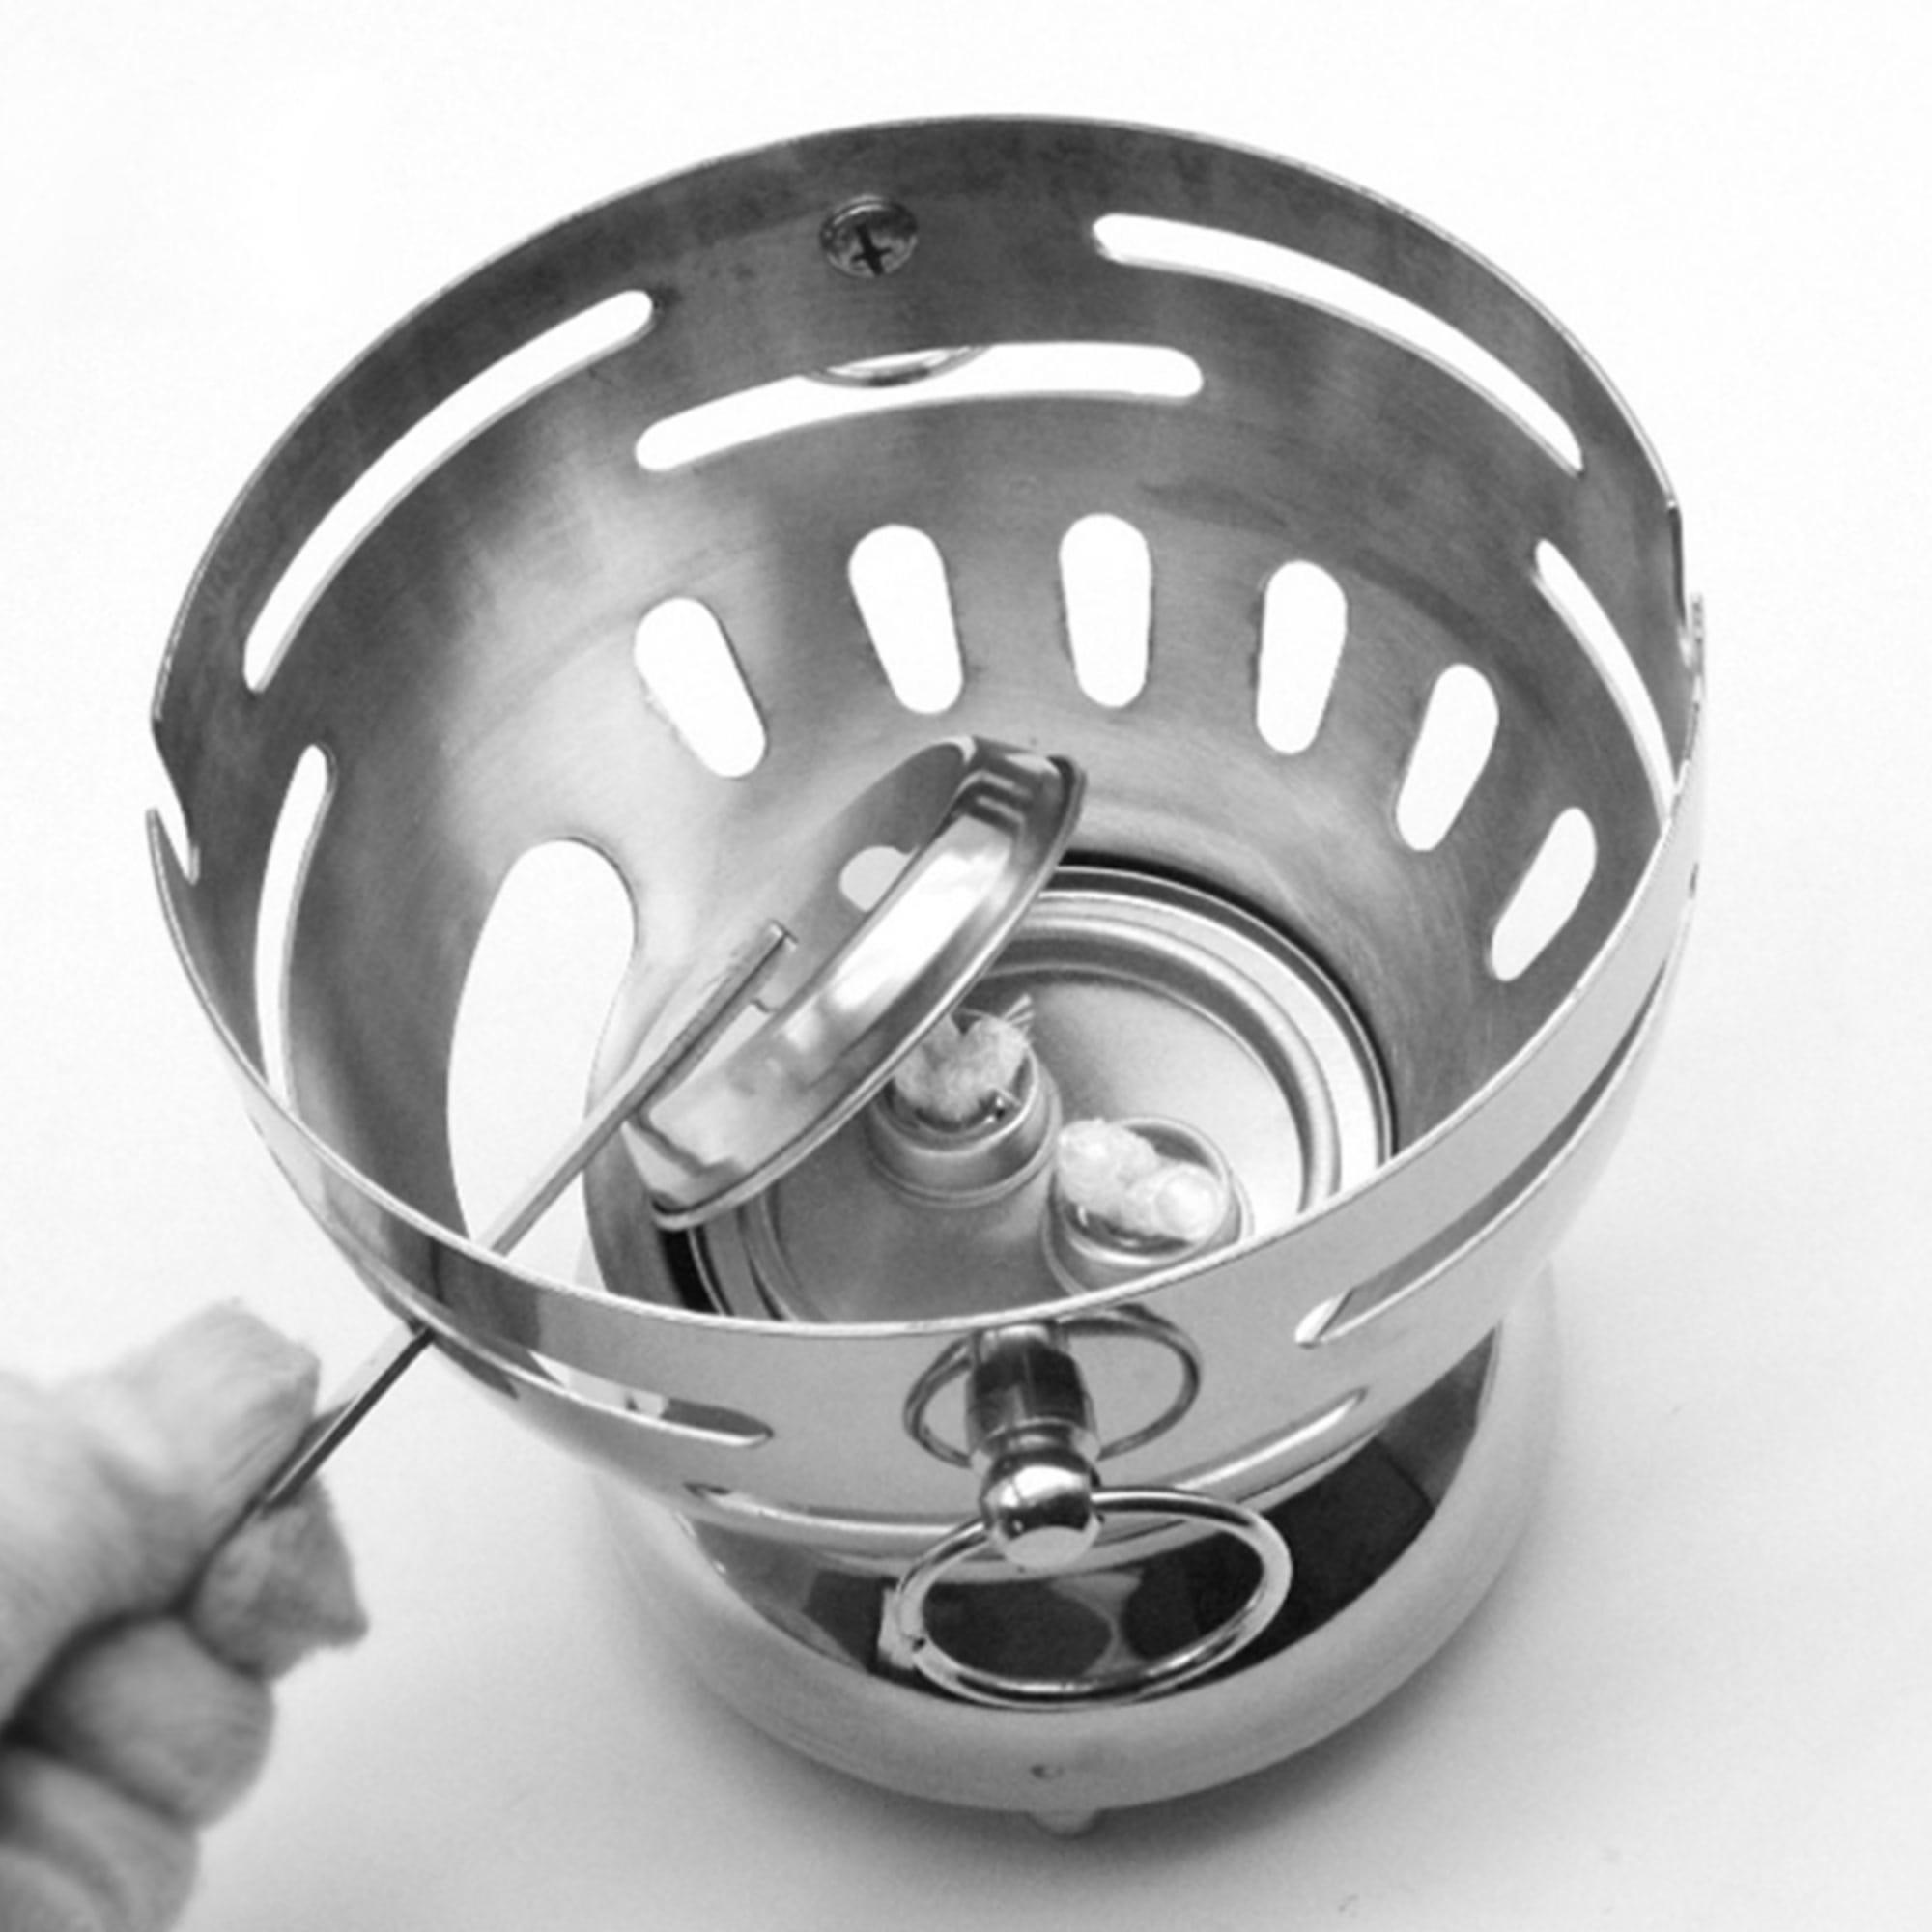 Soga Round Stainless Steel Single Hot Pot with Glass Lid 18.5cm Image 7